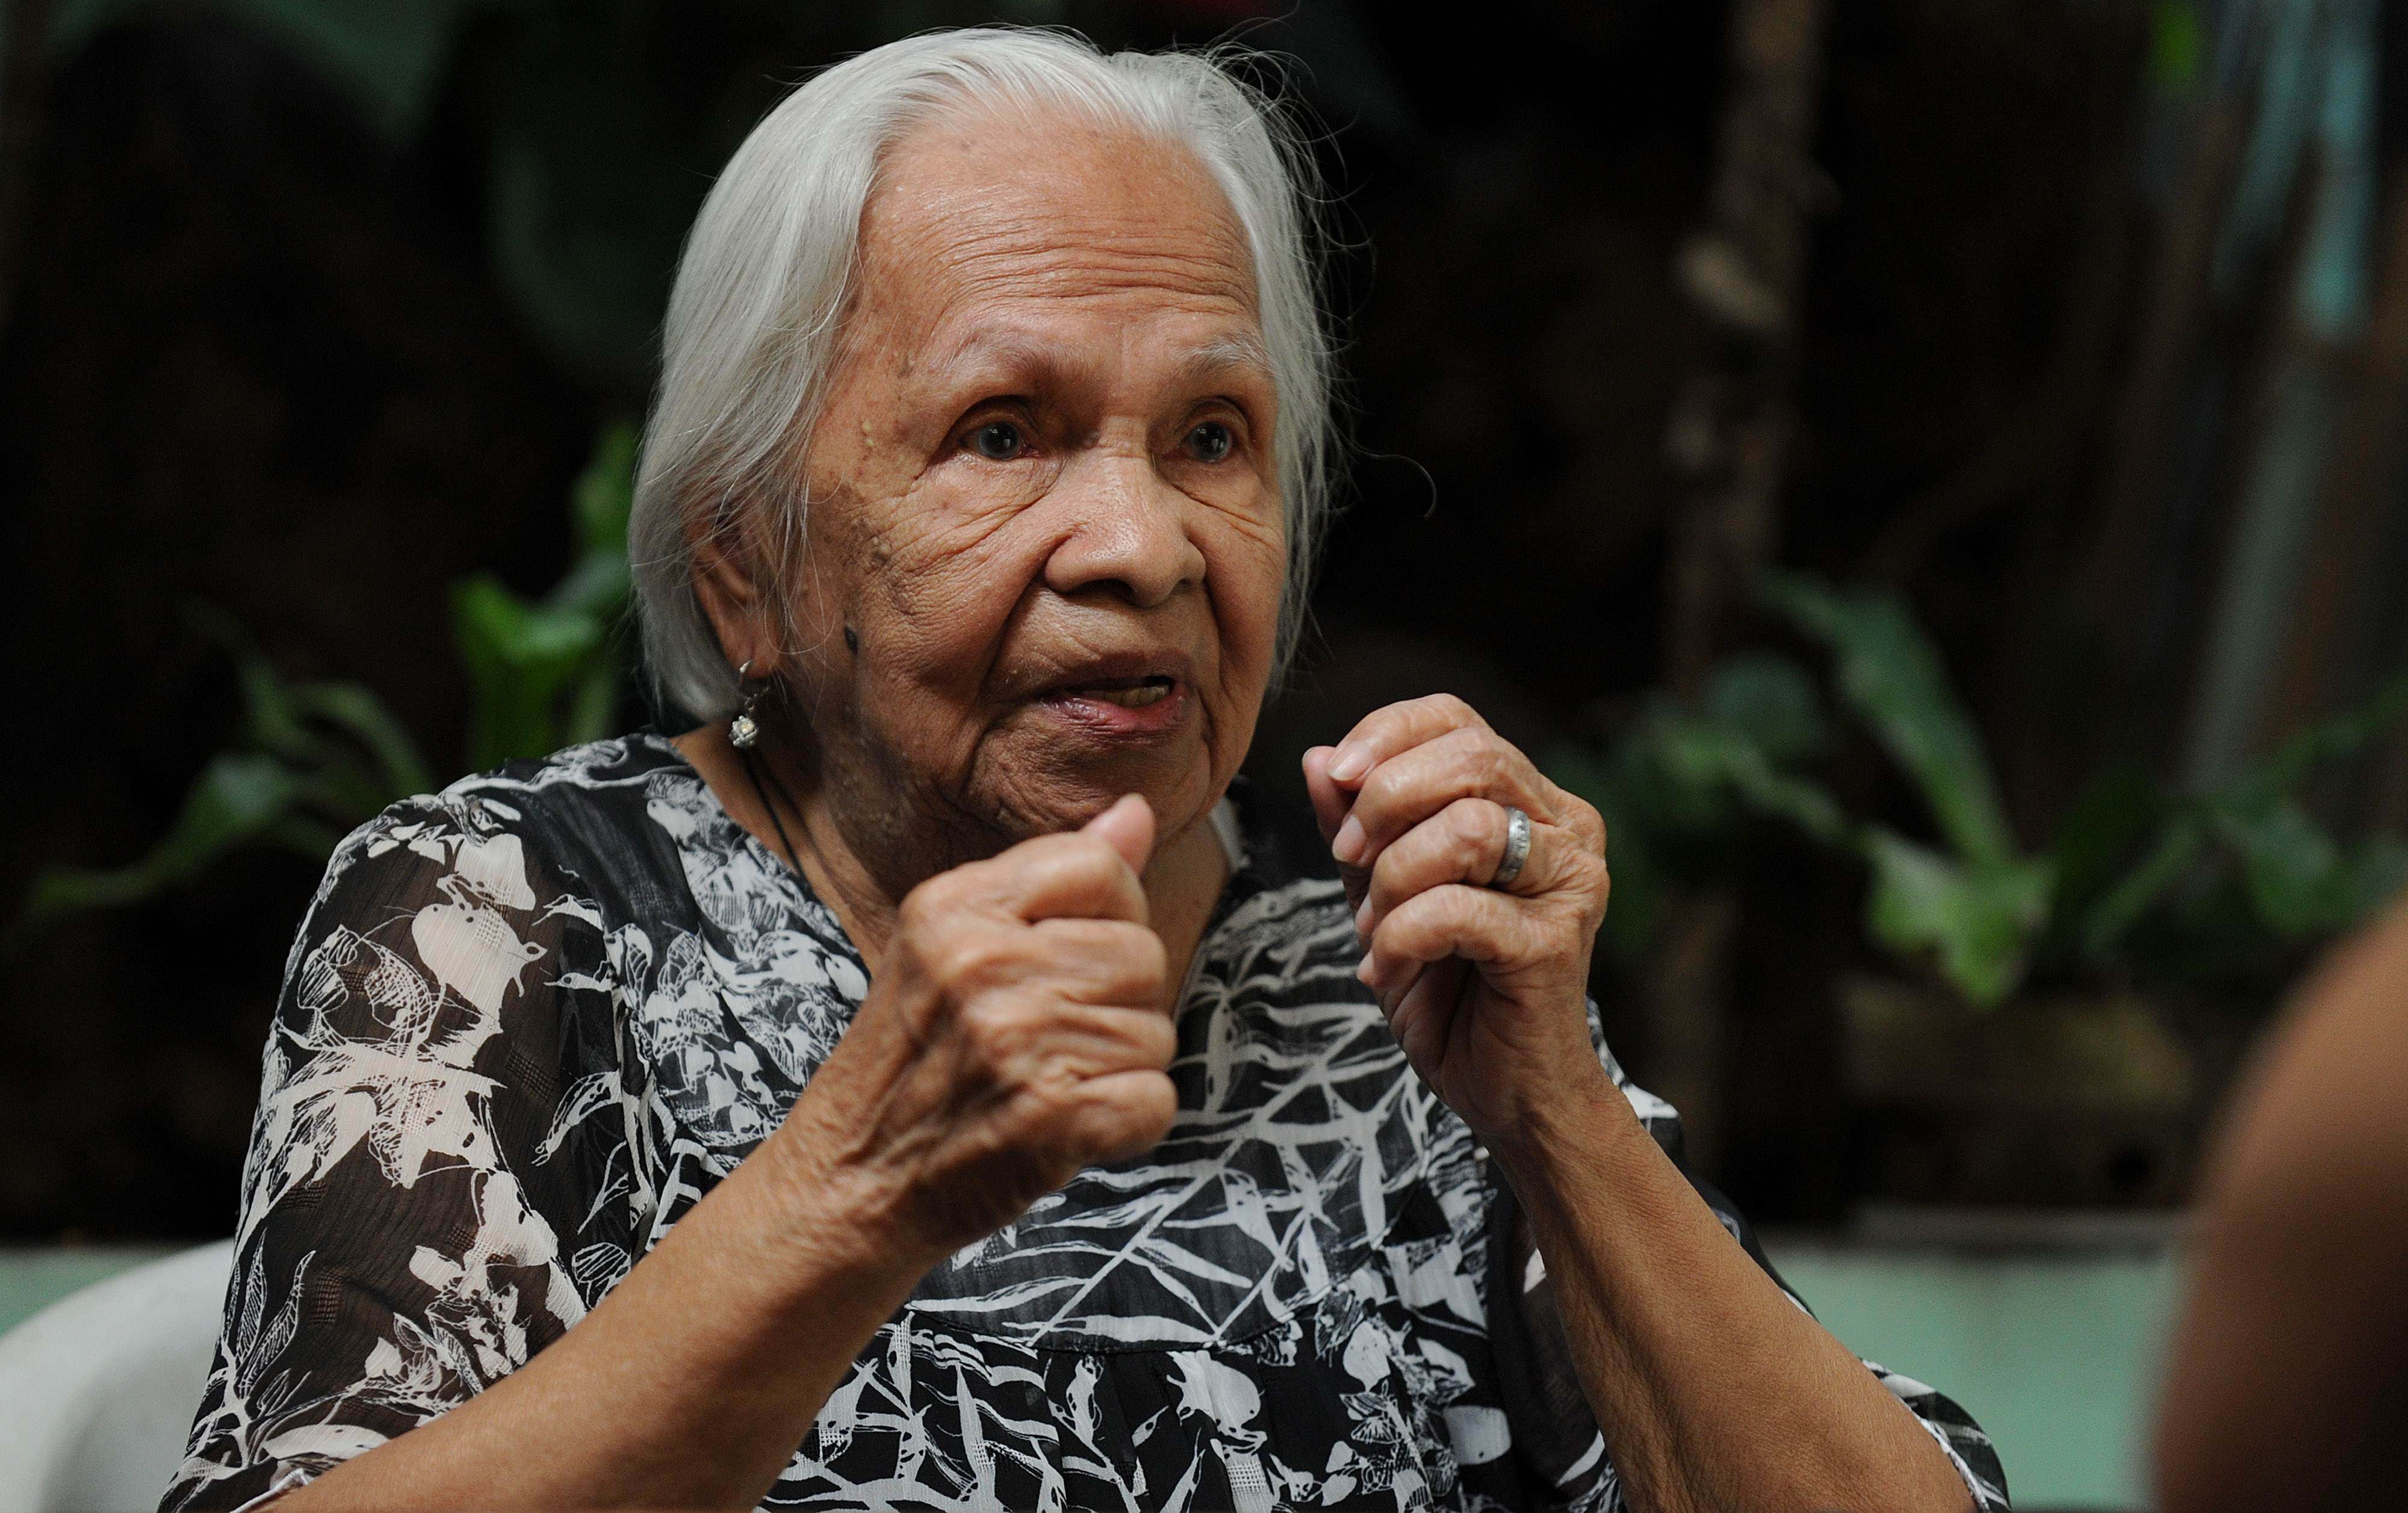 Hilaria Bustamante recalls her horrific experiences as a WWII sex slave for the Japanese army. She was among several plaintiffs who unsuccessfully sued the Japanese government in 1993 for sexual slavery by the military. She died this year, aged 97. File photo: AFP